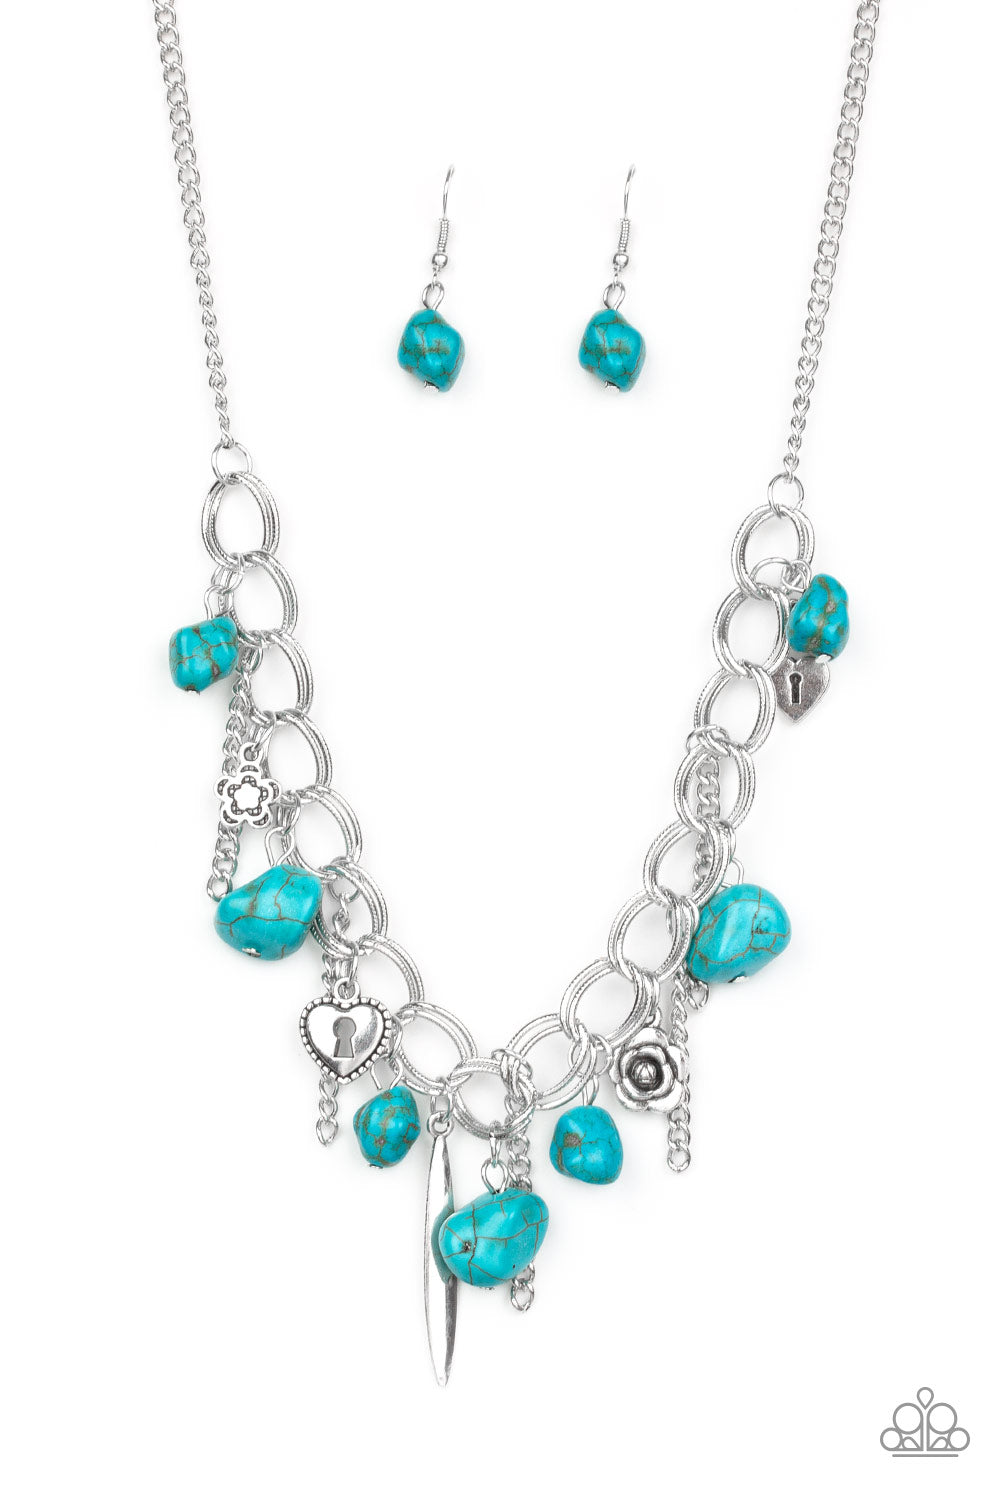 SOUTHERN SWEETHEART - BLUE TURQUOISE HEART FLOWER CHARM NECKLACE